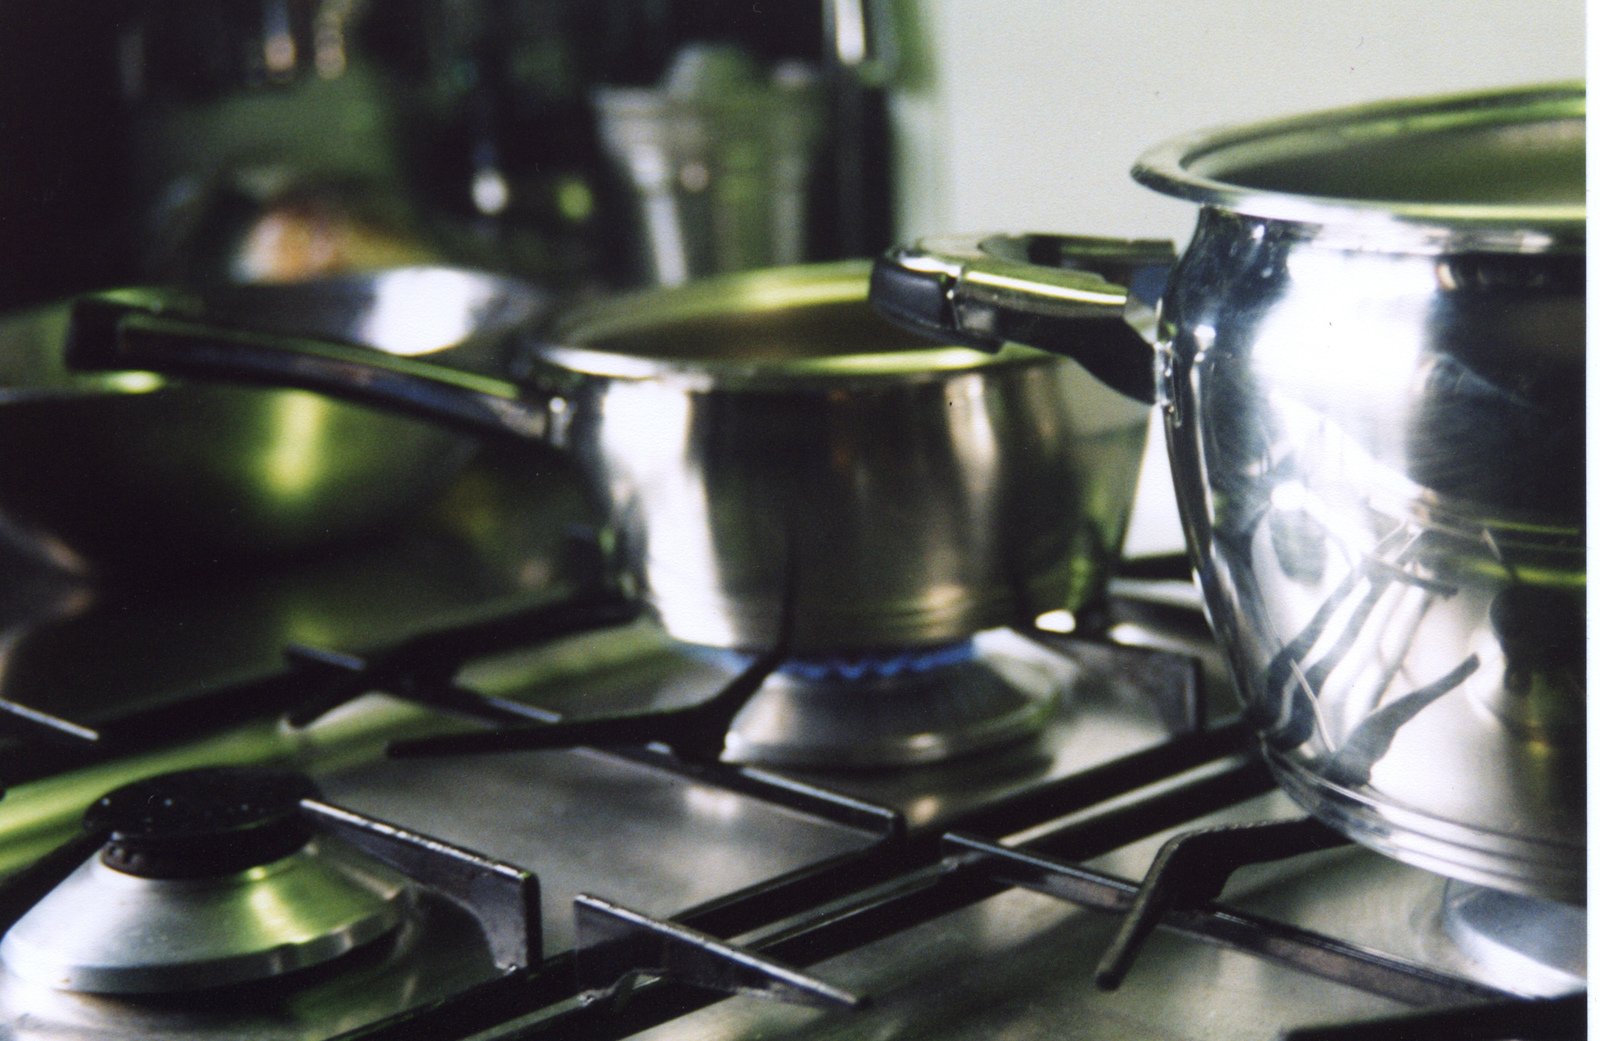 some shiny pots are cooking on a stove top